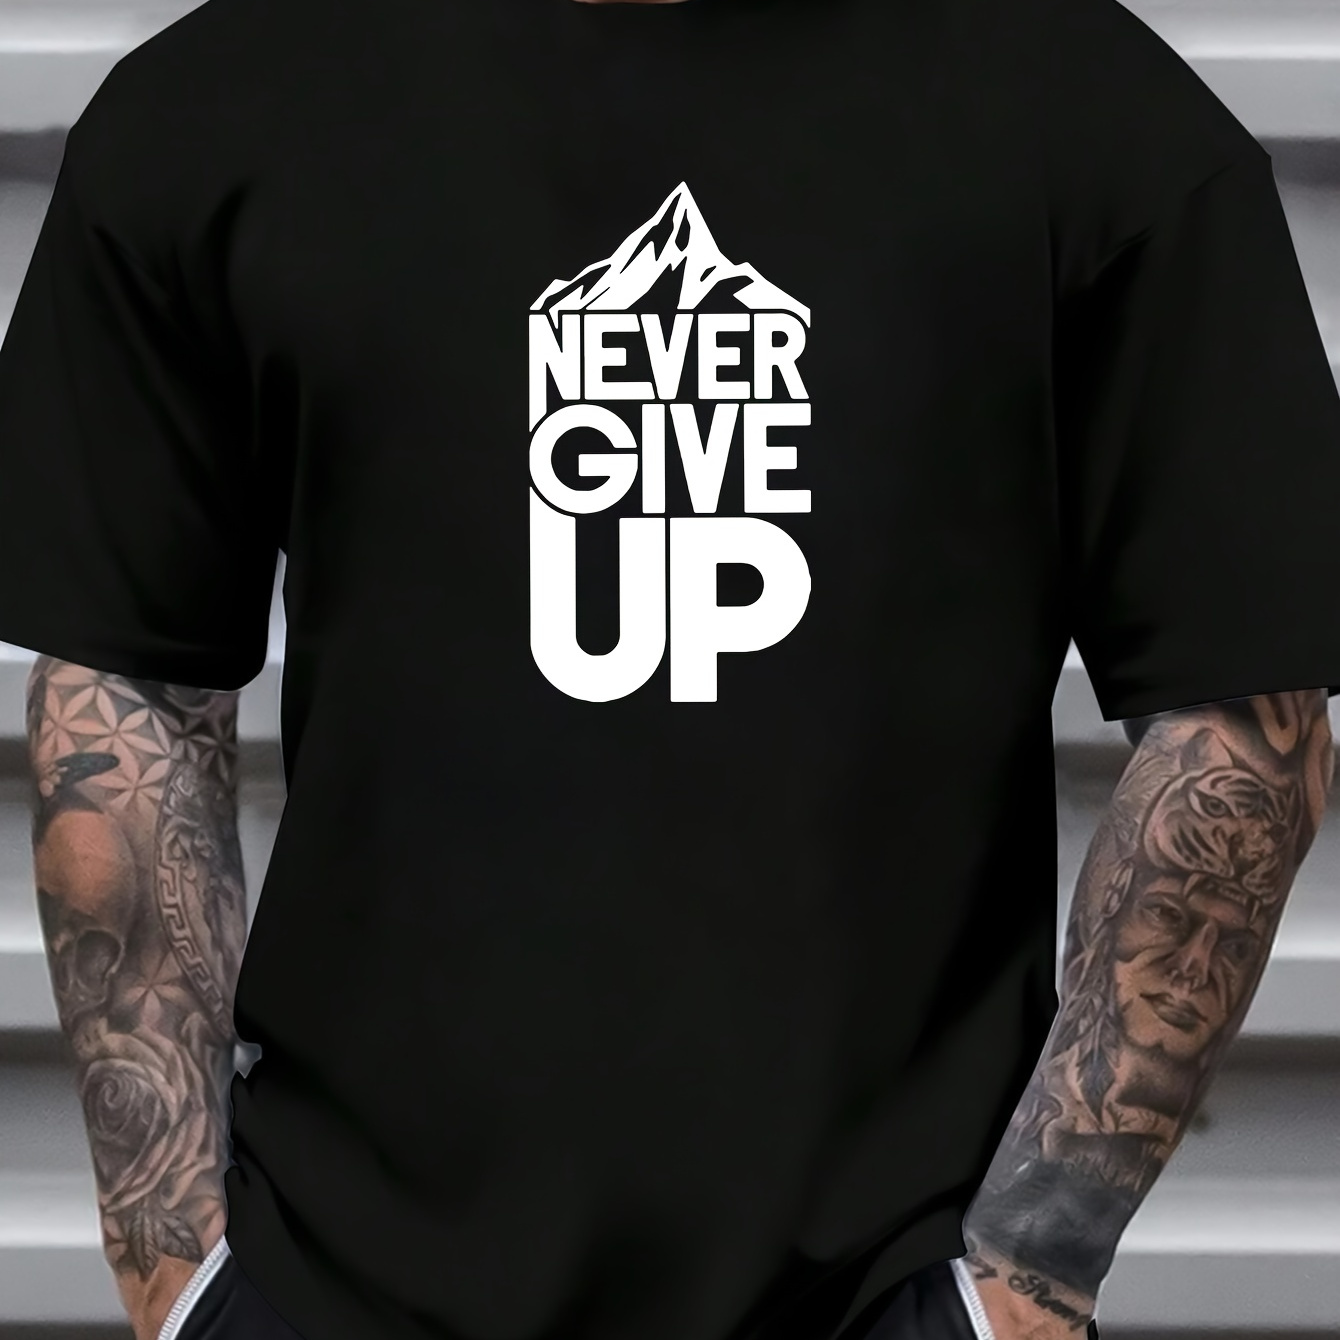 

Never Give Up Print T-shirt, Stylish And Breathable Street , Simple Comfy Cotton Top, Casual Crew Neck Short Sleeve T-shirt For Summer